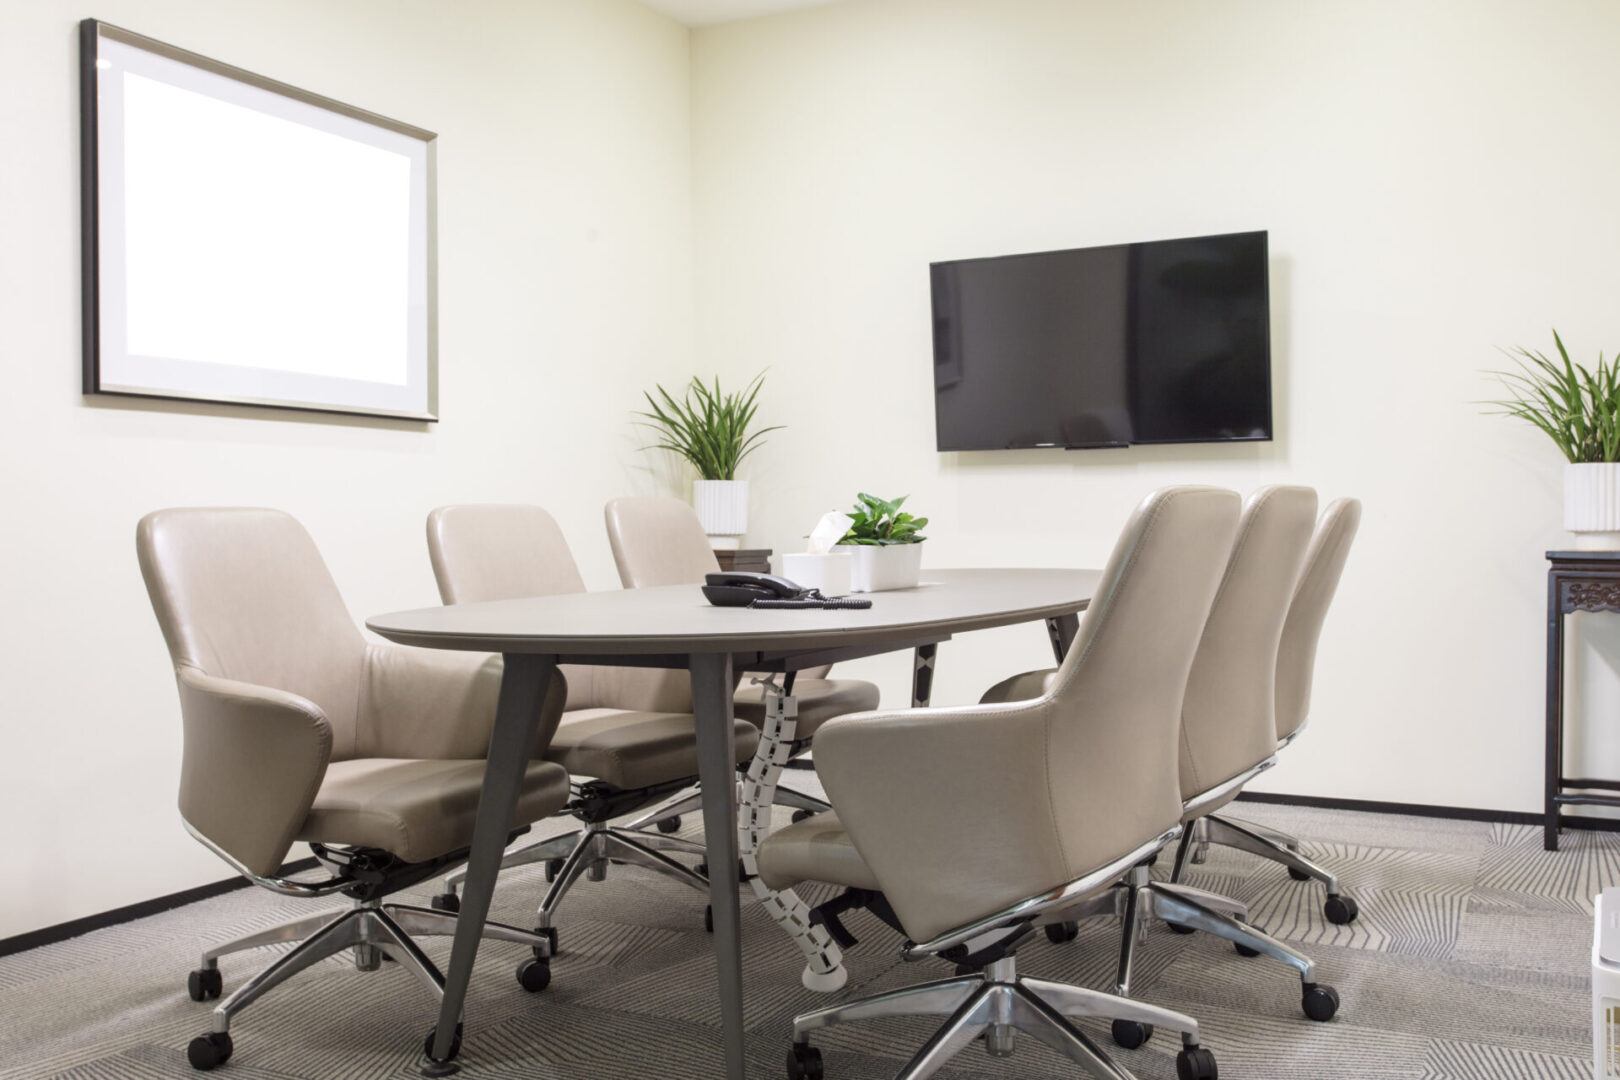 A conference room with white chairs and a table.